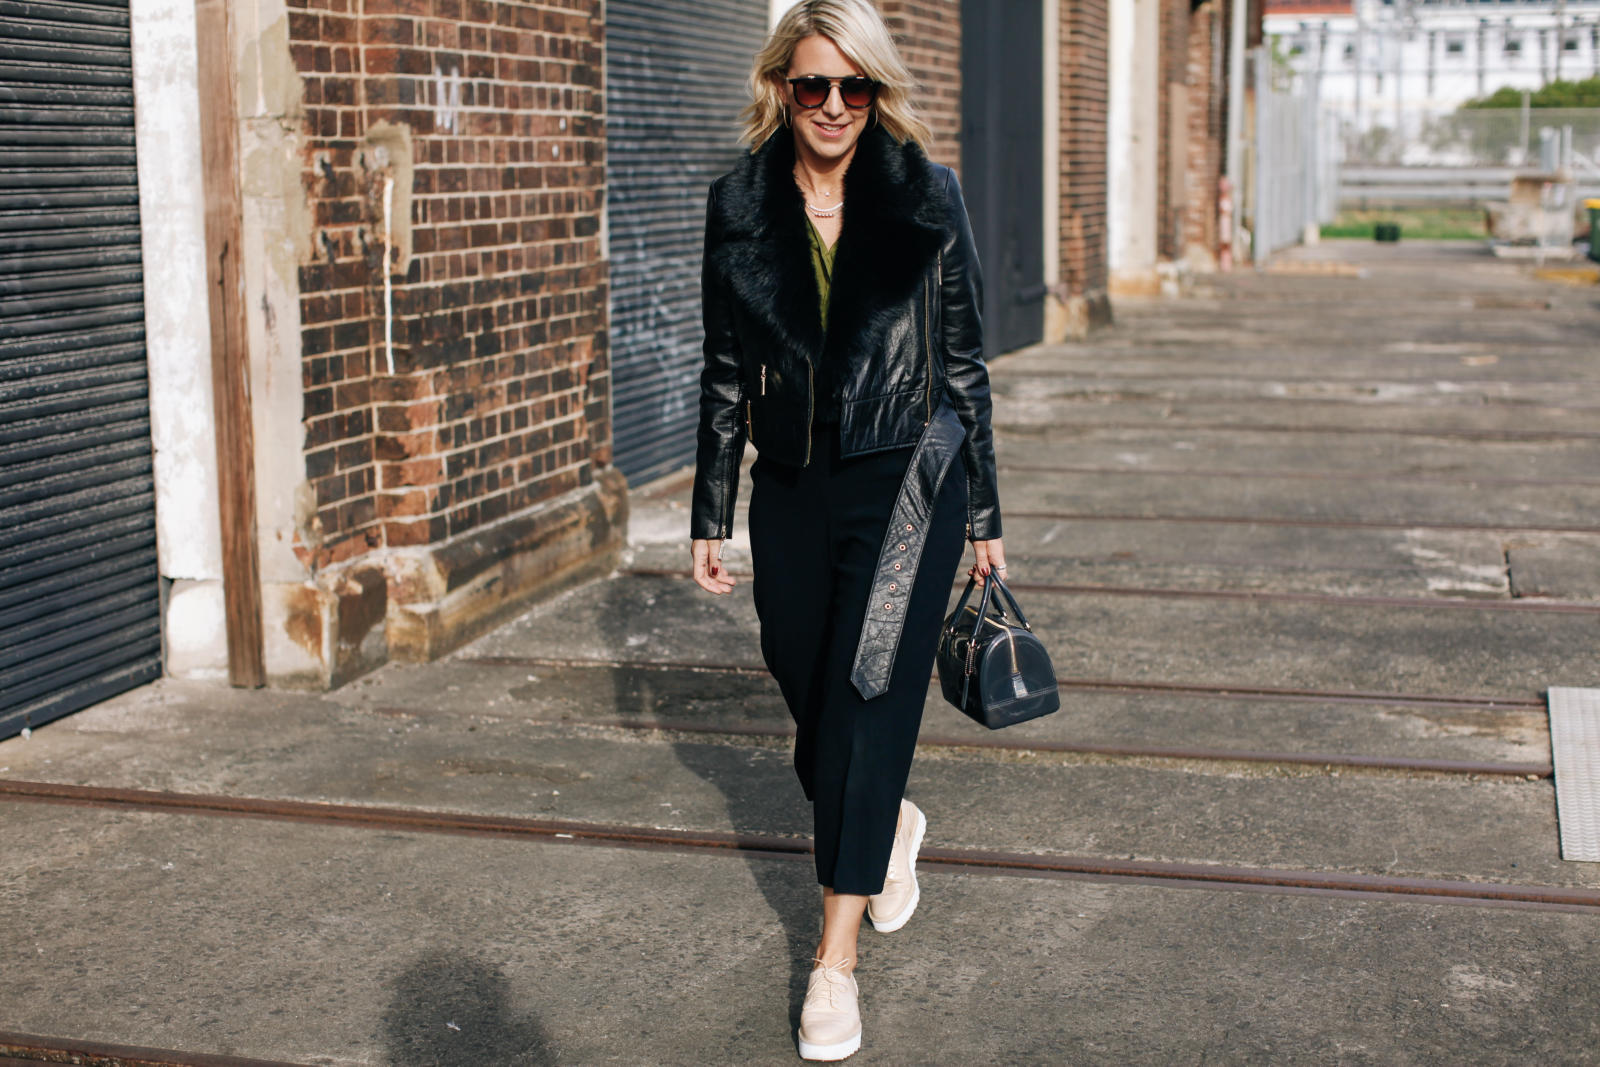 Luxe For Less: Camilla & Marc Leather Jacket